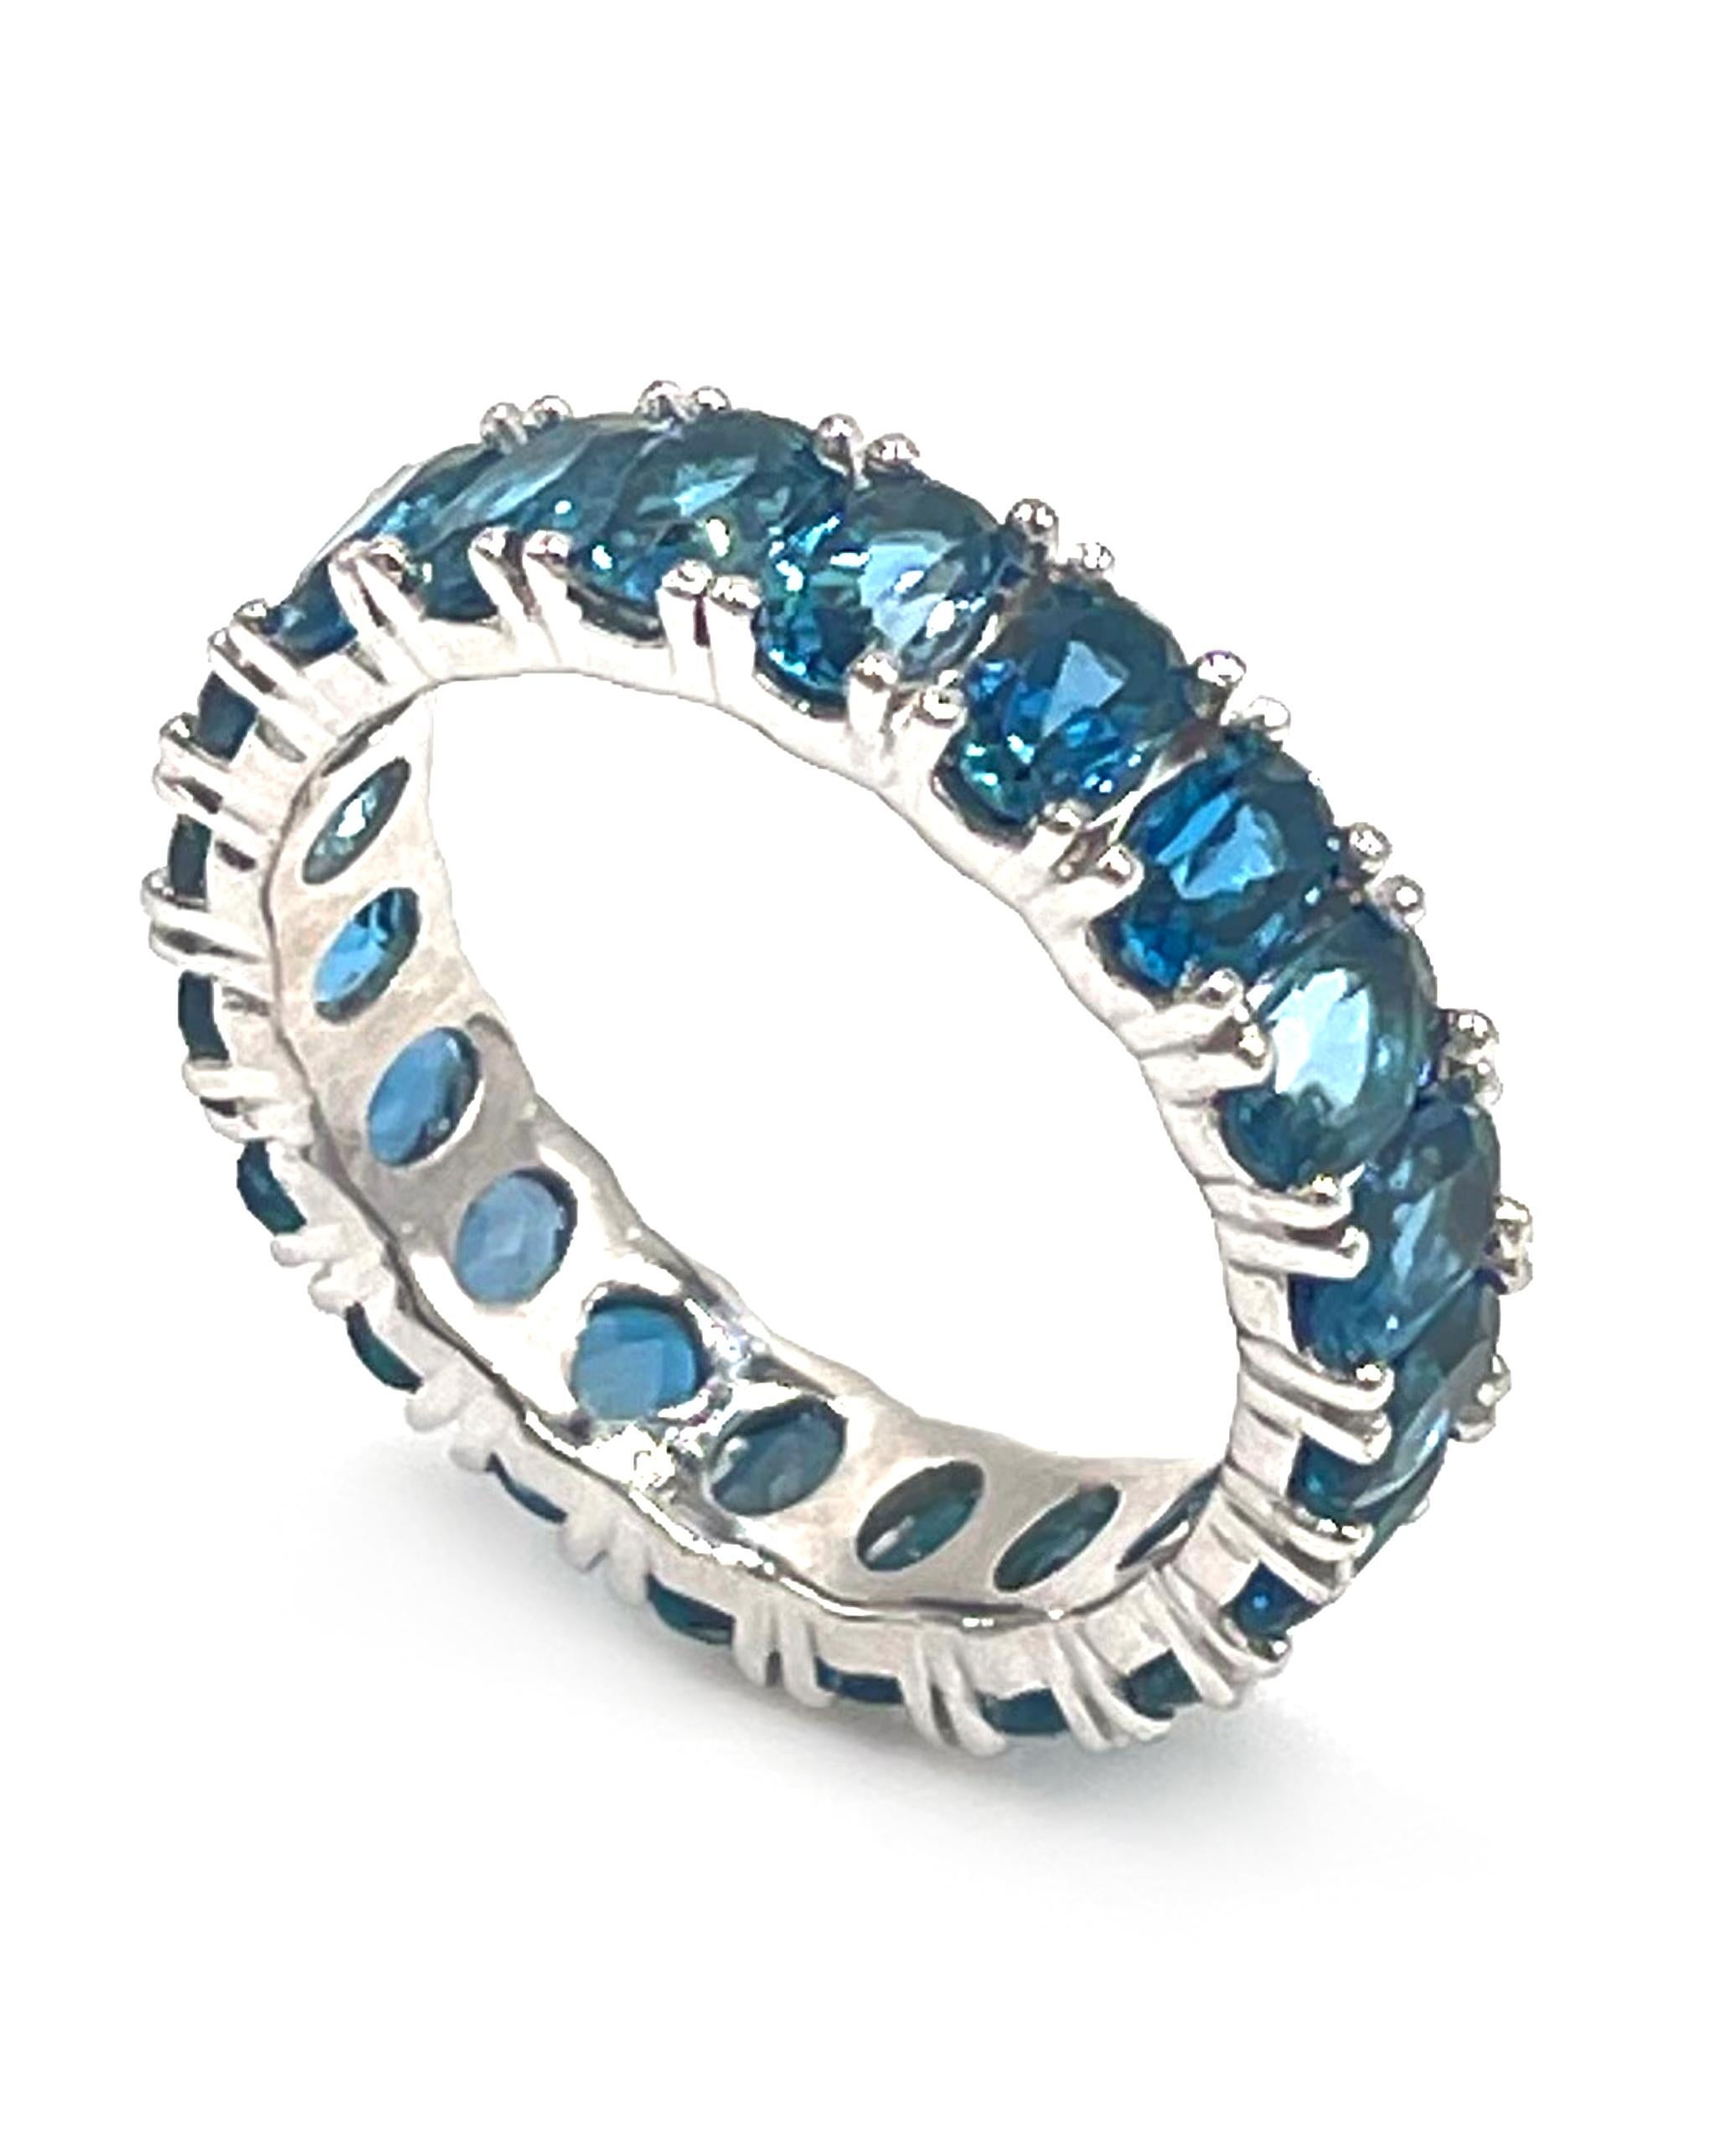 14K white gold eternity ring with prong set oval shape London blue topaz. There are a total of 20 oval shaped London blue topaz weighing 5.29 carats total.

* Finger size 6.75
* Each topaz is approximately 5x3mm
* 5mm wide